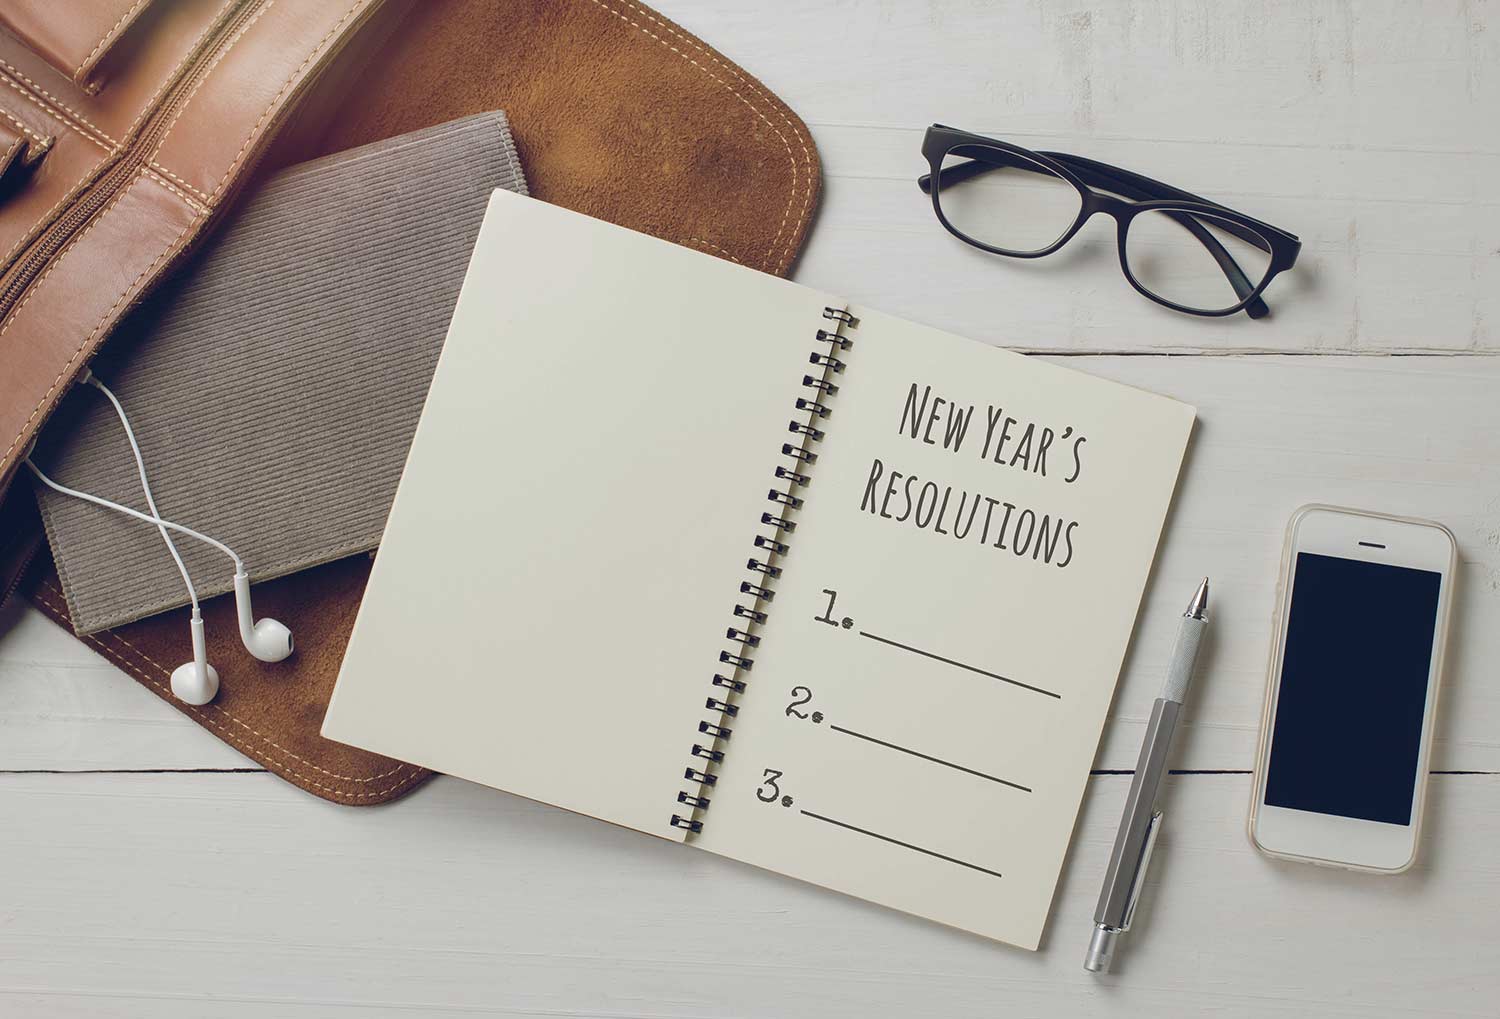 New Years resolutions for career advancement